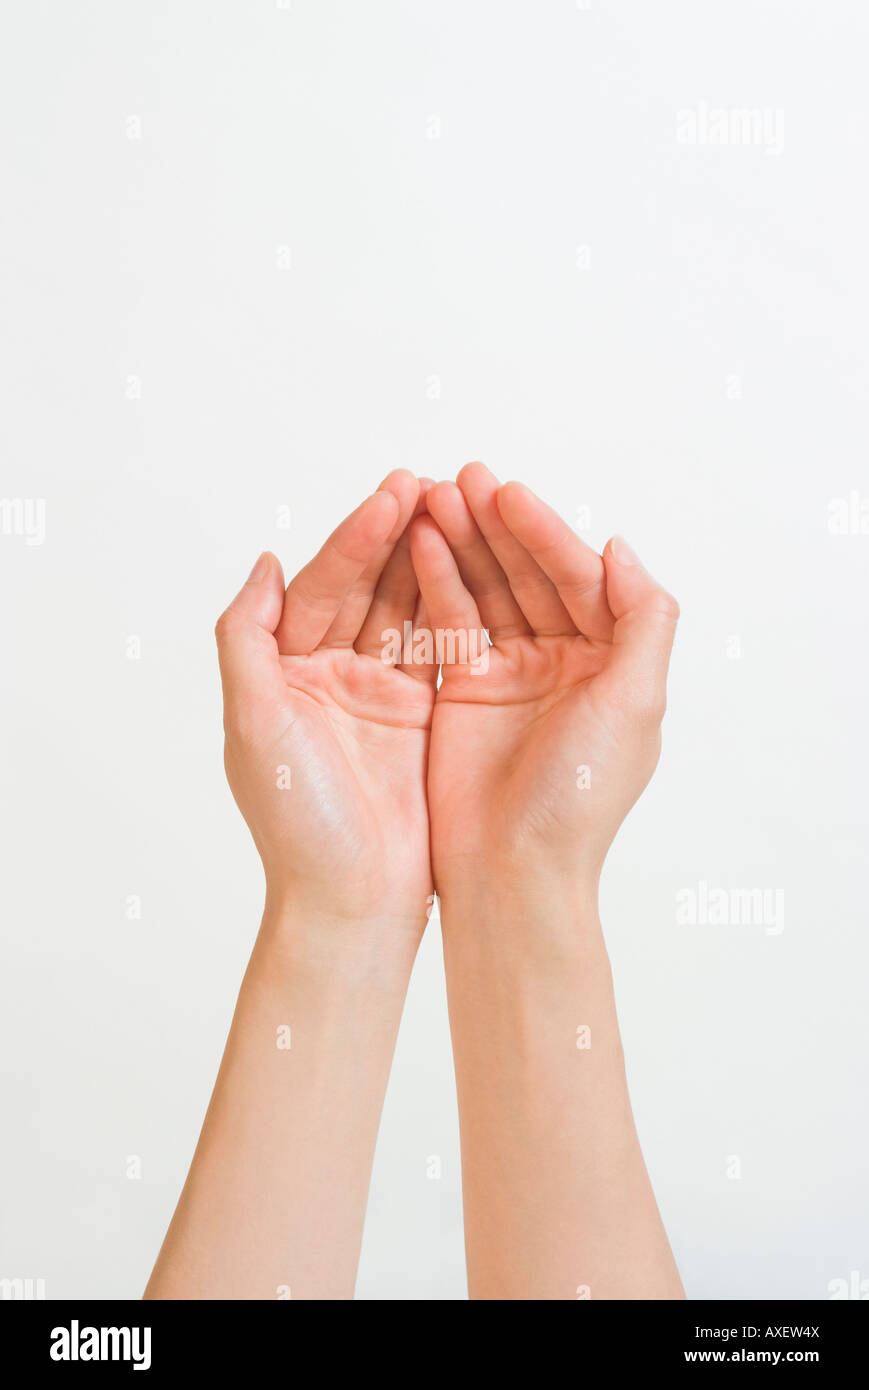 Woman holding out cupped hands Stock Photo